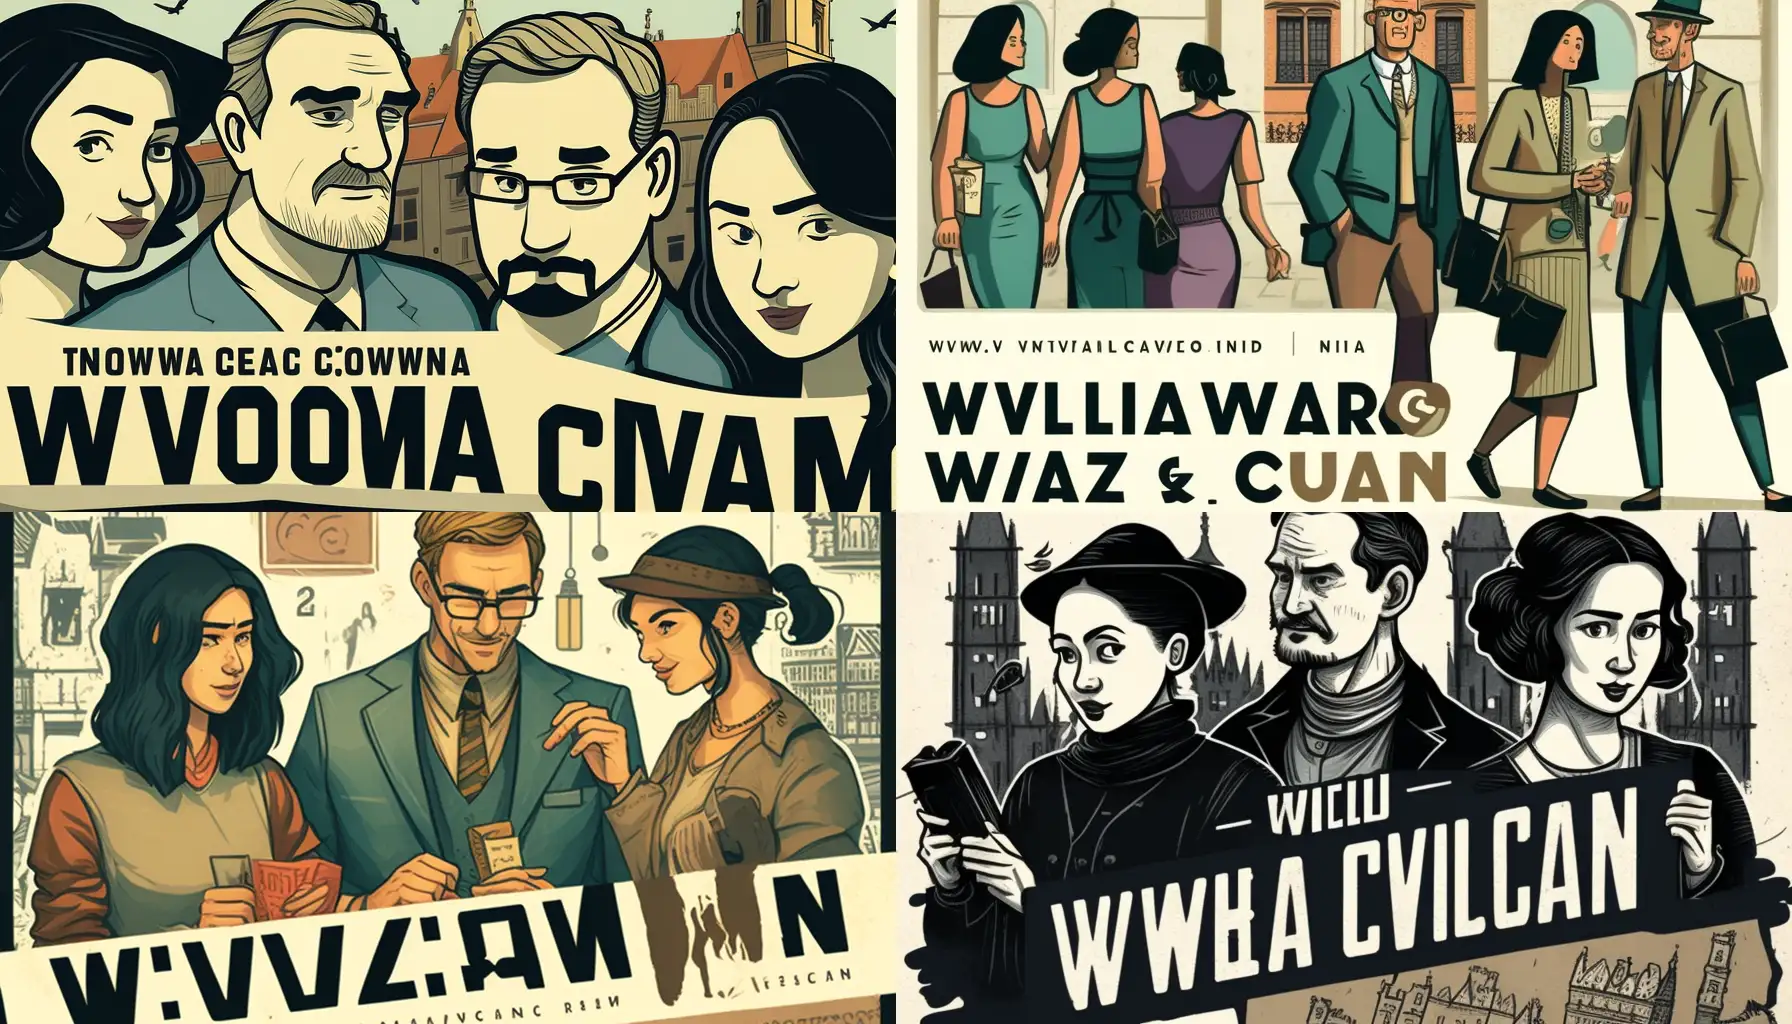 A captivating digital illustration showcasing the excitement and mystery of an urban game in Wrocław. The image should depict a group of 3-4 diverse participants, both men and women in their 20s and 30s, engaged in solving puzzles while exploring the charming Old Town of Wrocław. The participants should be holding game cards and smartphones, indicating the use of a dedicated app. The background should feature iconic landmarks of Wrocław's Old Town, such as the colorful townhouses, the Market Square with the Old Town Hall, and the St. Elizabeth's Church. Incorporate a semi-transparent overlay of a digital 6-digit code, hinting at the game's objective of cracking the city's code. The illustration should convey a sense of adventure, teamwork, and intellectual challenge. Use a vibrant, modern color palette with pops of bright colors to create an engaging and eye-catching visual. The overall style should be a mix of realistic and slightly stylized elements, appealing to a young adult audience. Dimensions: 1920x1070 pixels --ar 16:9 --v 4 --q 2 --s 1000